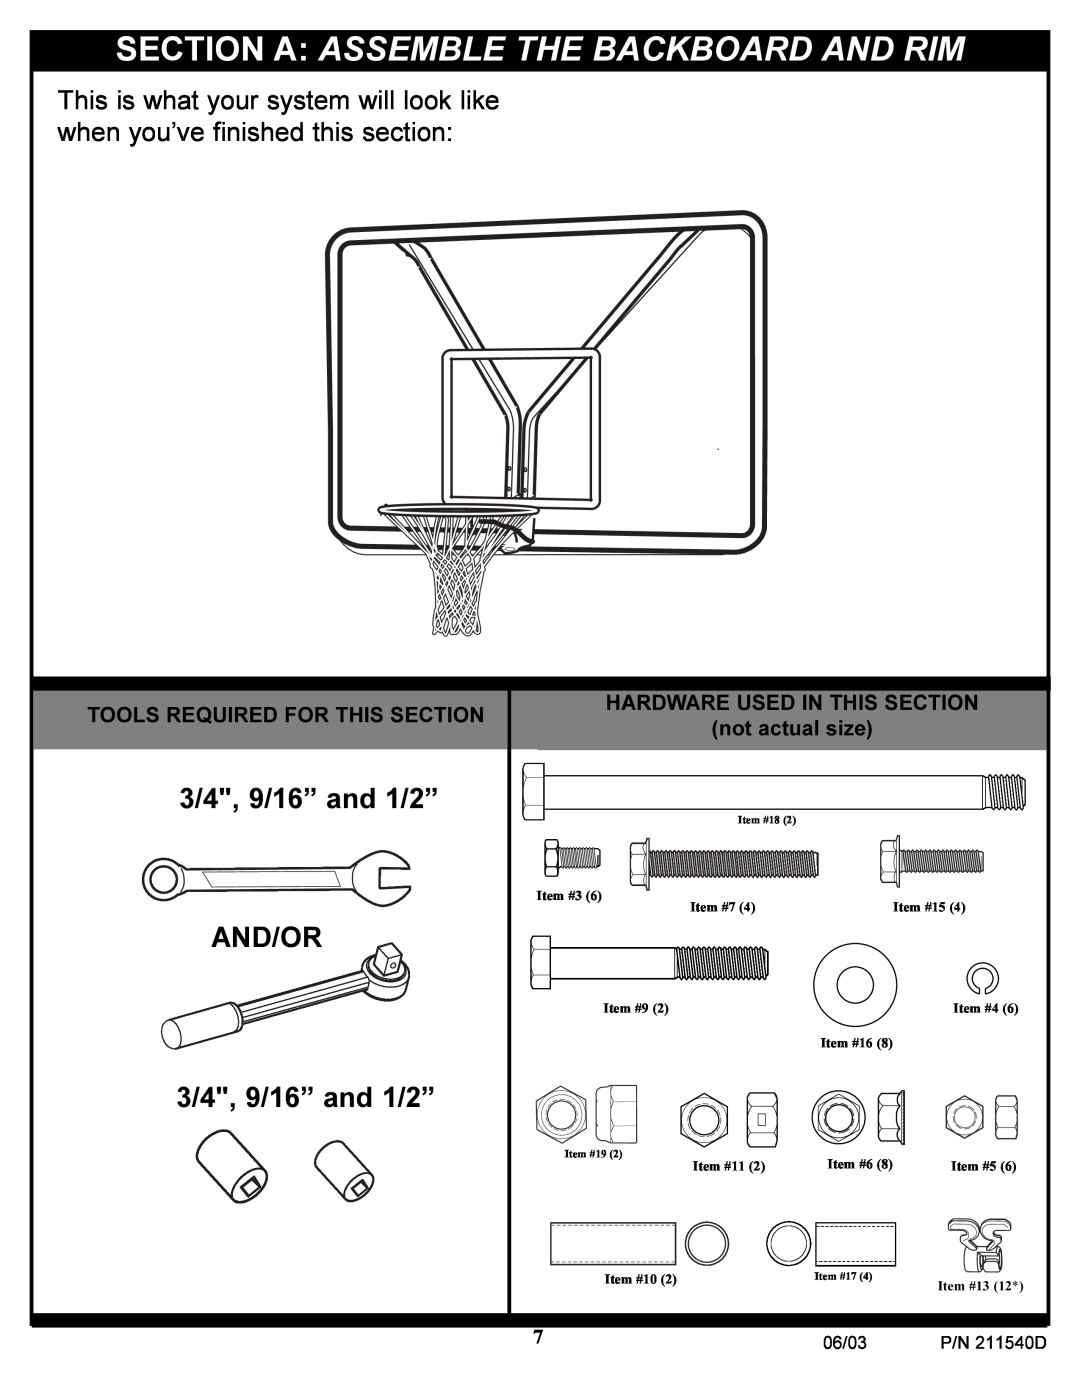 Huffy Backboard and Rim manual Section A Assemble The Backboard And Rim, 3/4, 9/16” and 1/2” AND/OR 3/4, 9/16” and 1/2” 